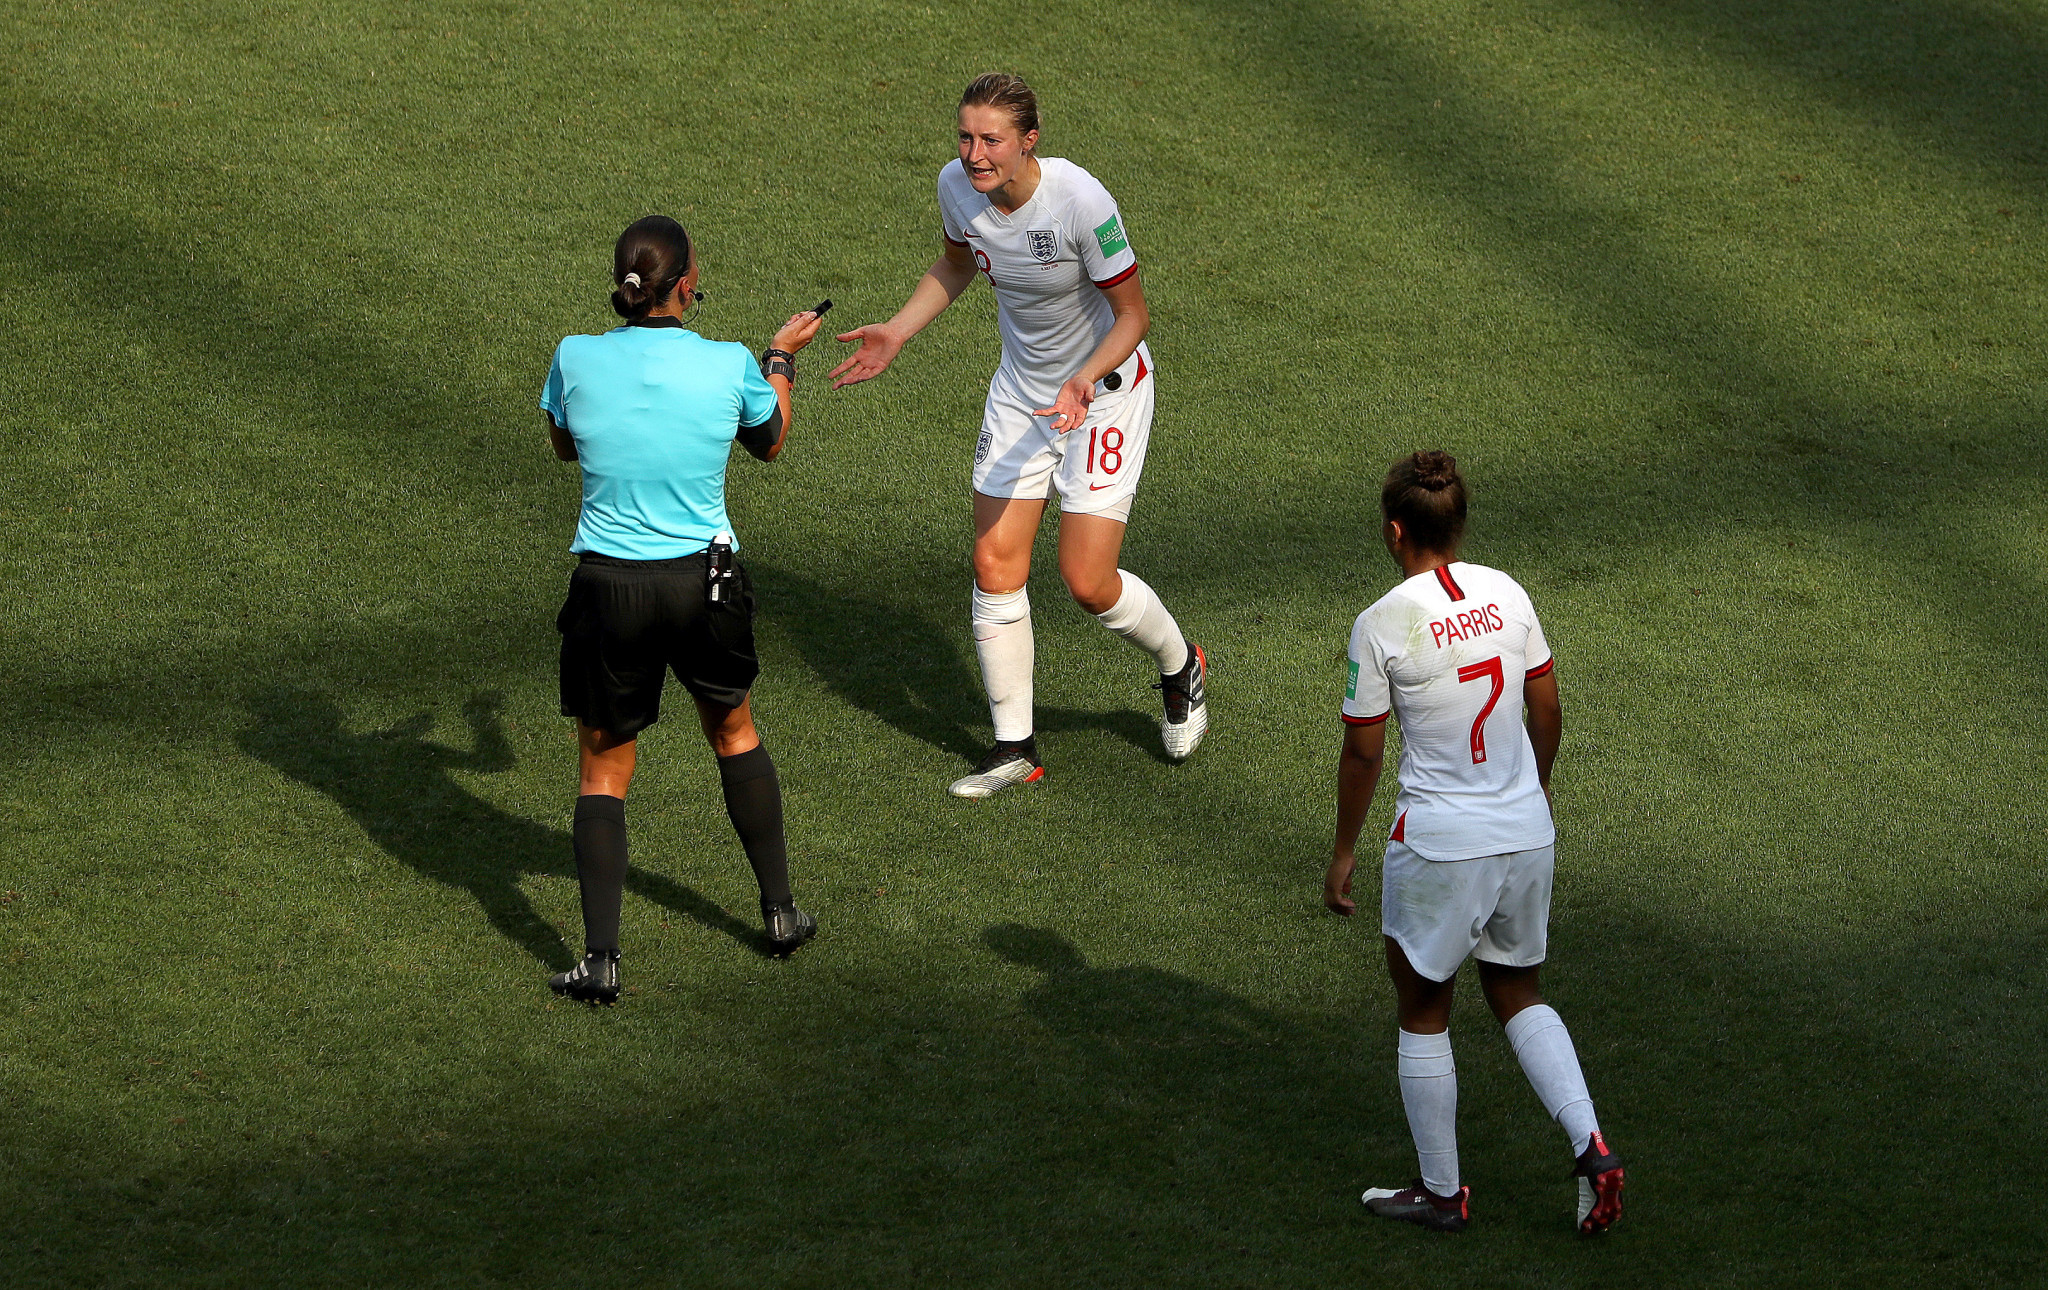 Ellen White thought she had equalised shortly after but her goal was ruled out ©Getty Images